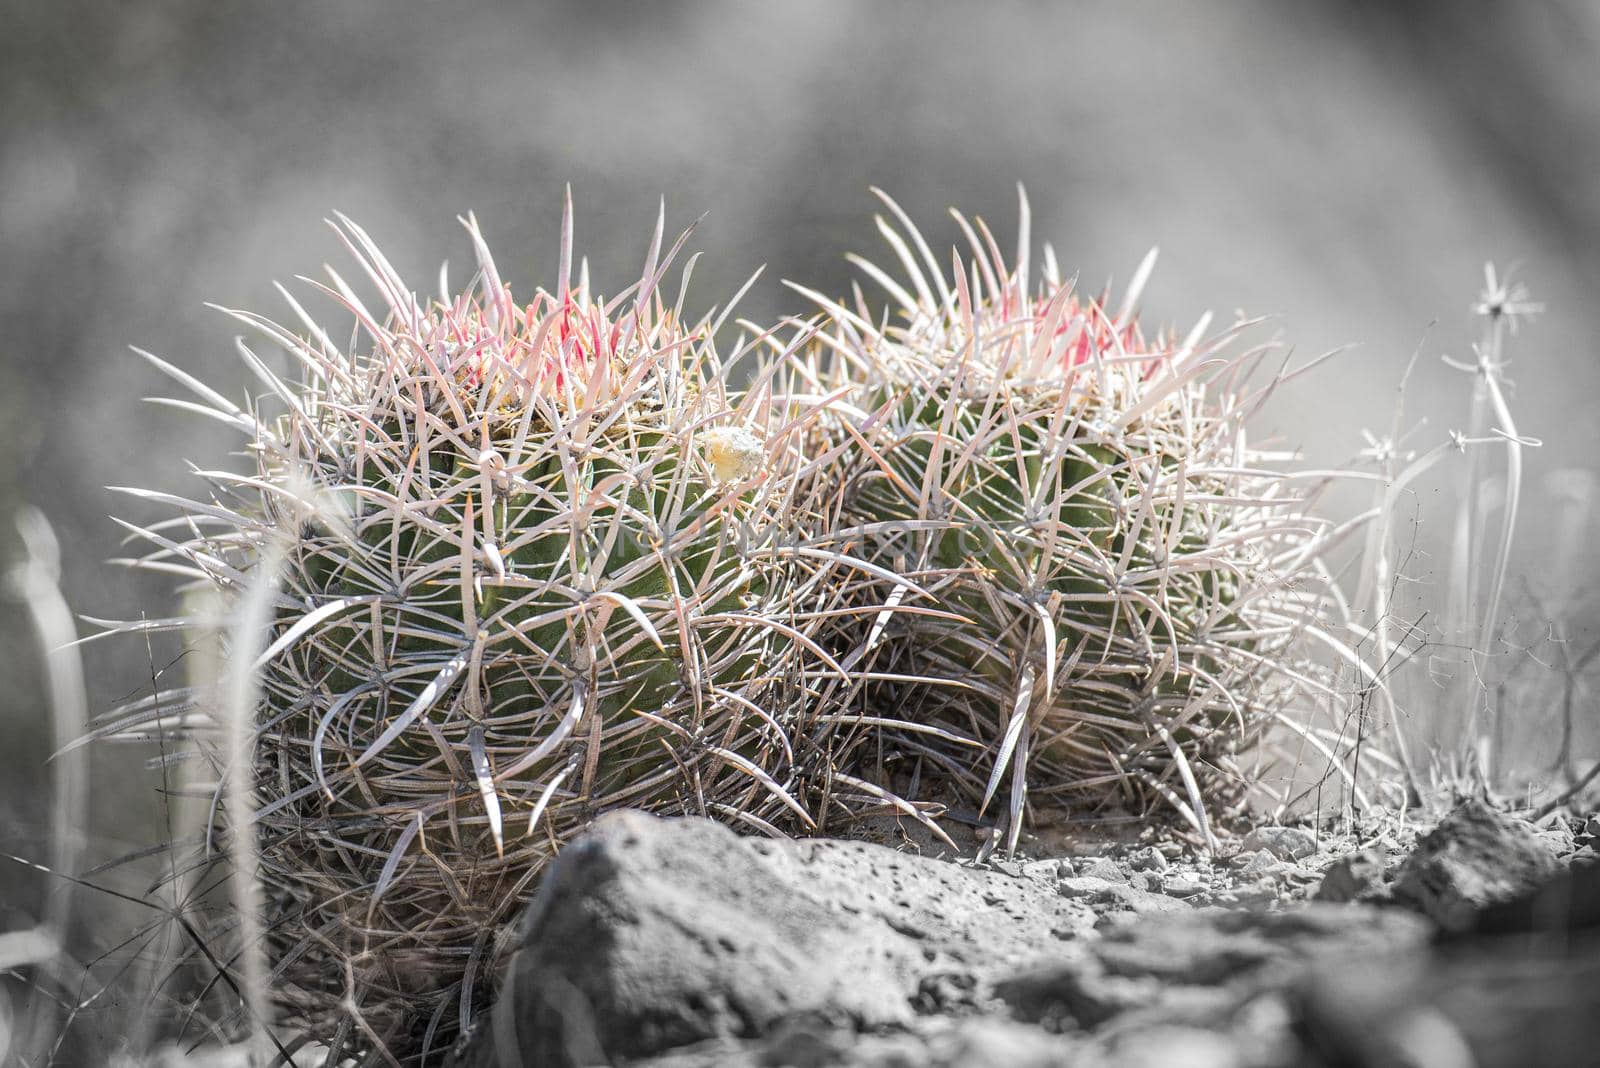 Barrel Cactus Topped in red color with spikes